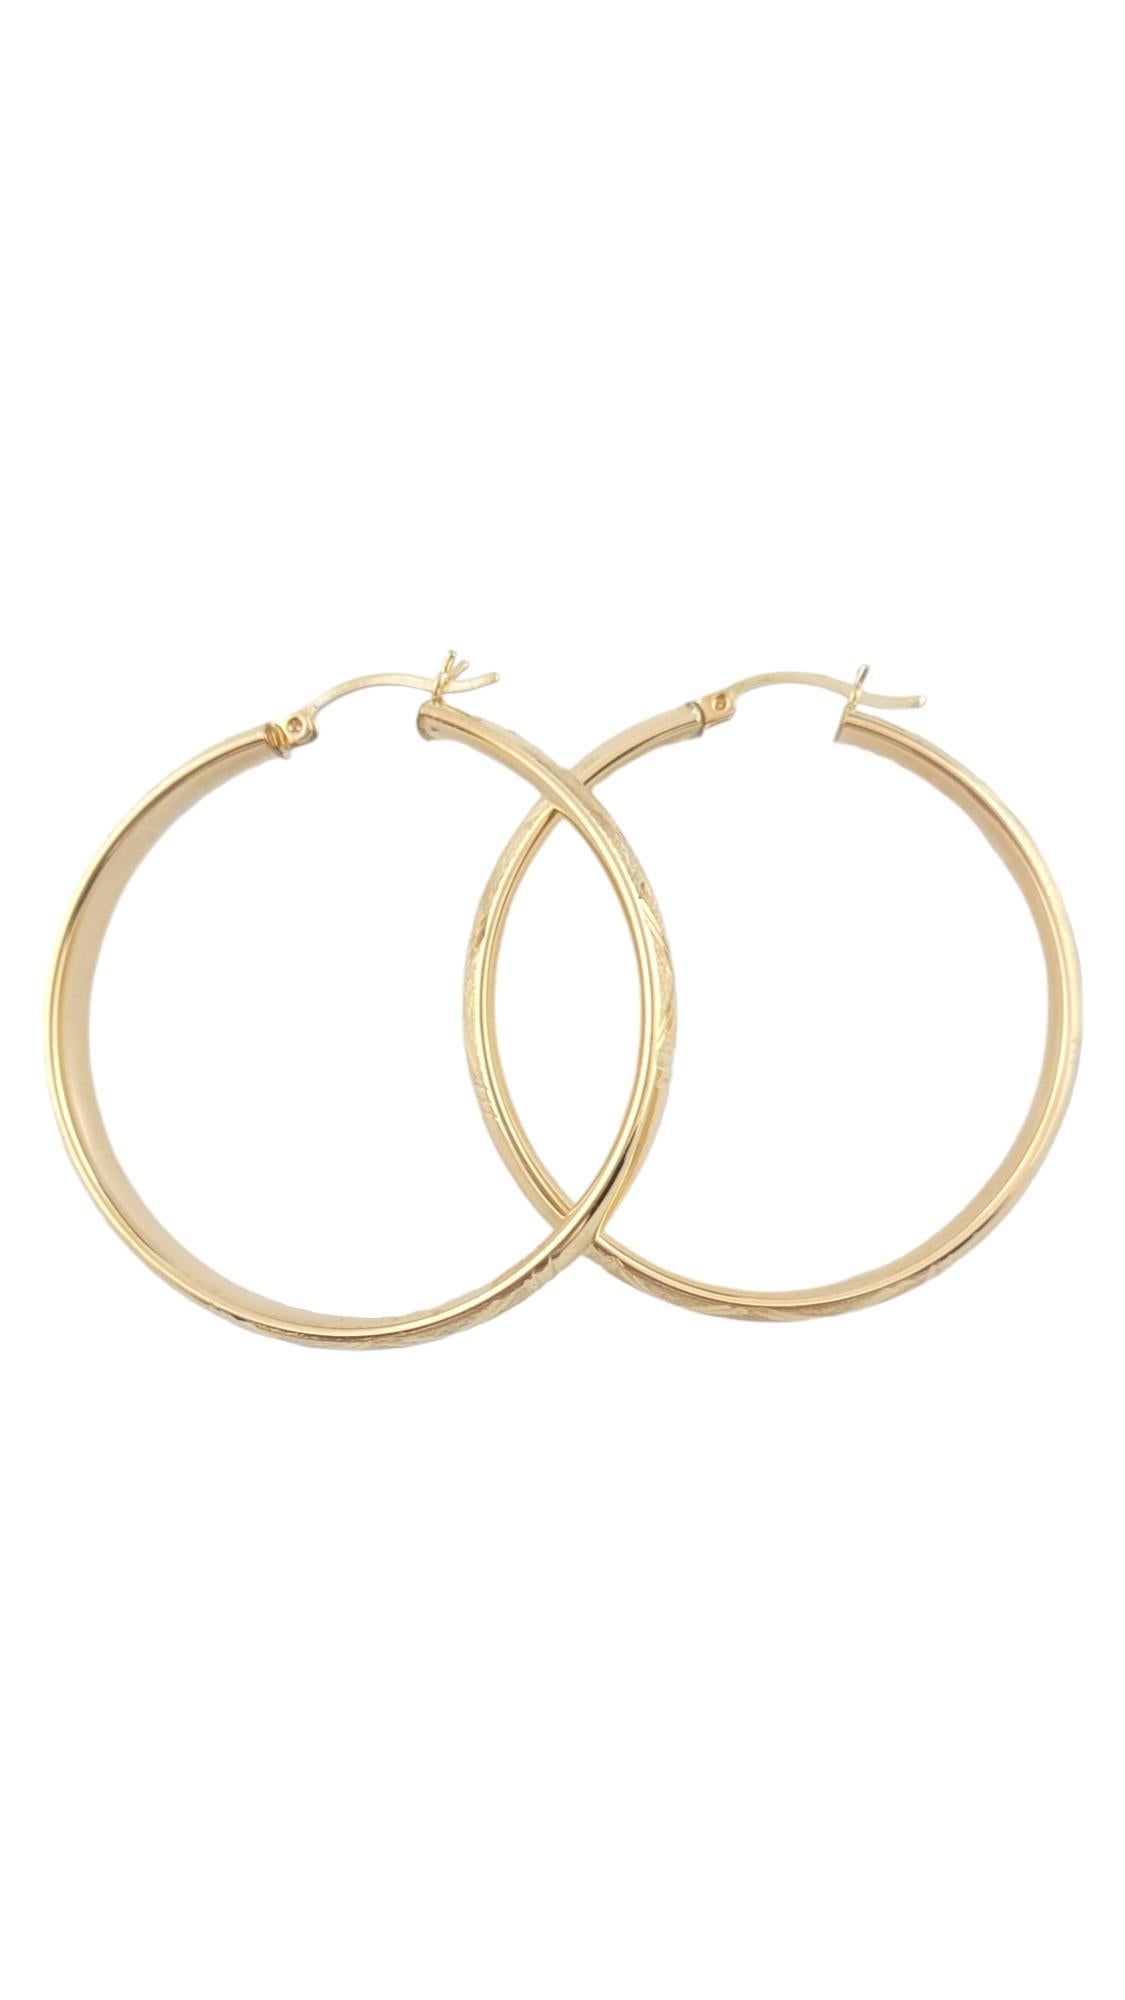 14K Yellow Gold Patterned Hoop Earrings #16196 In Good Condition For Sale In Washington Depot, CT